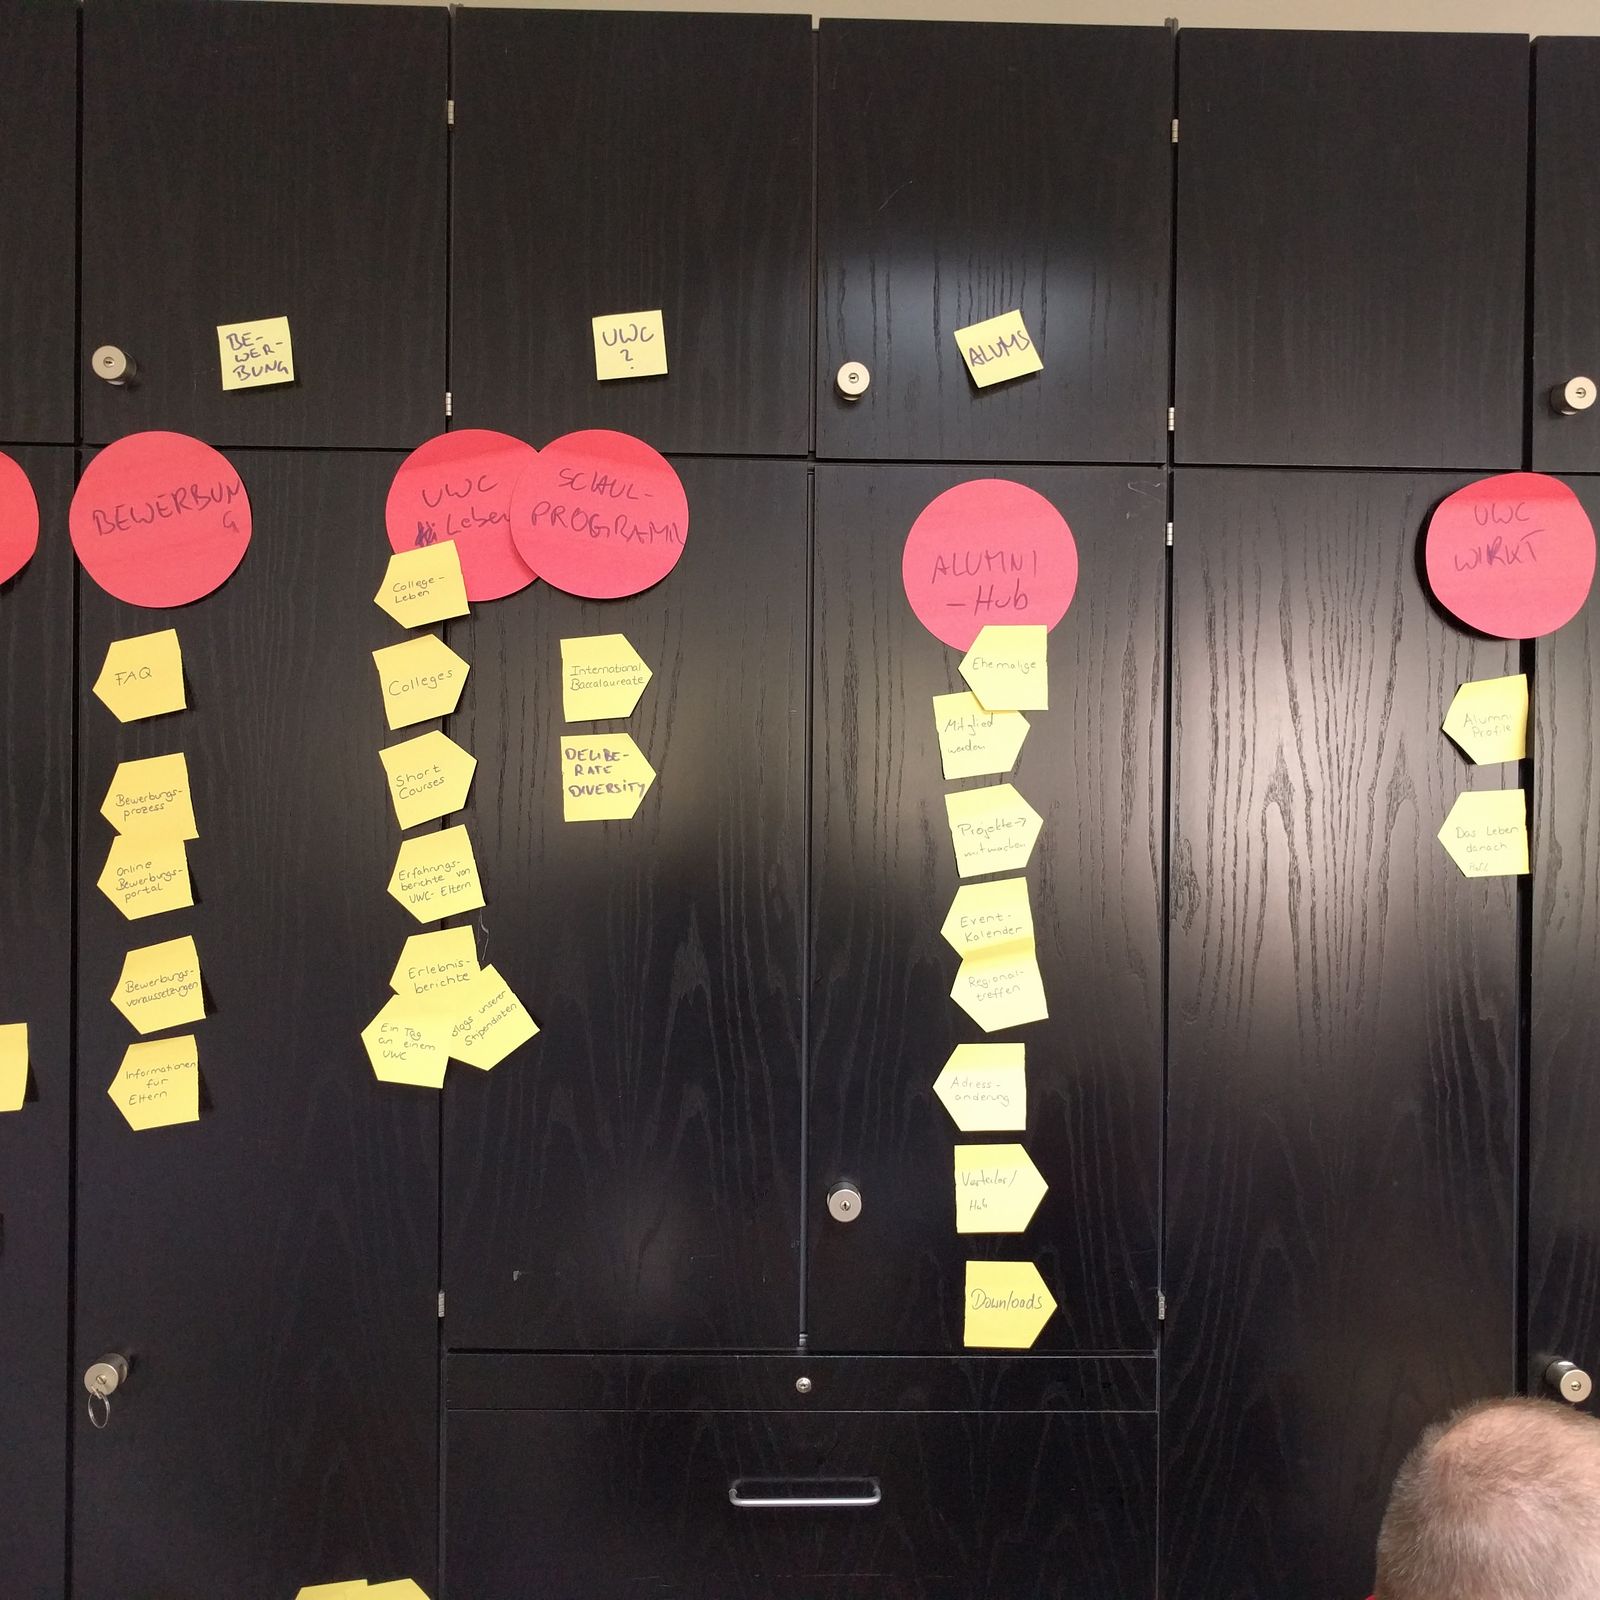 Post-it notes with page names written on them are grouped by category on a wall